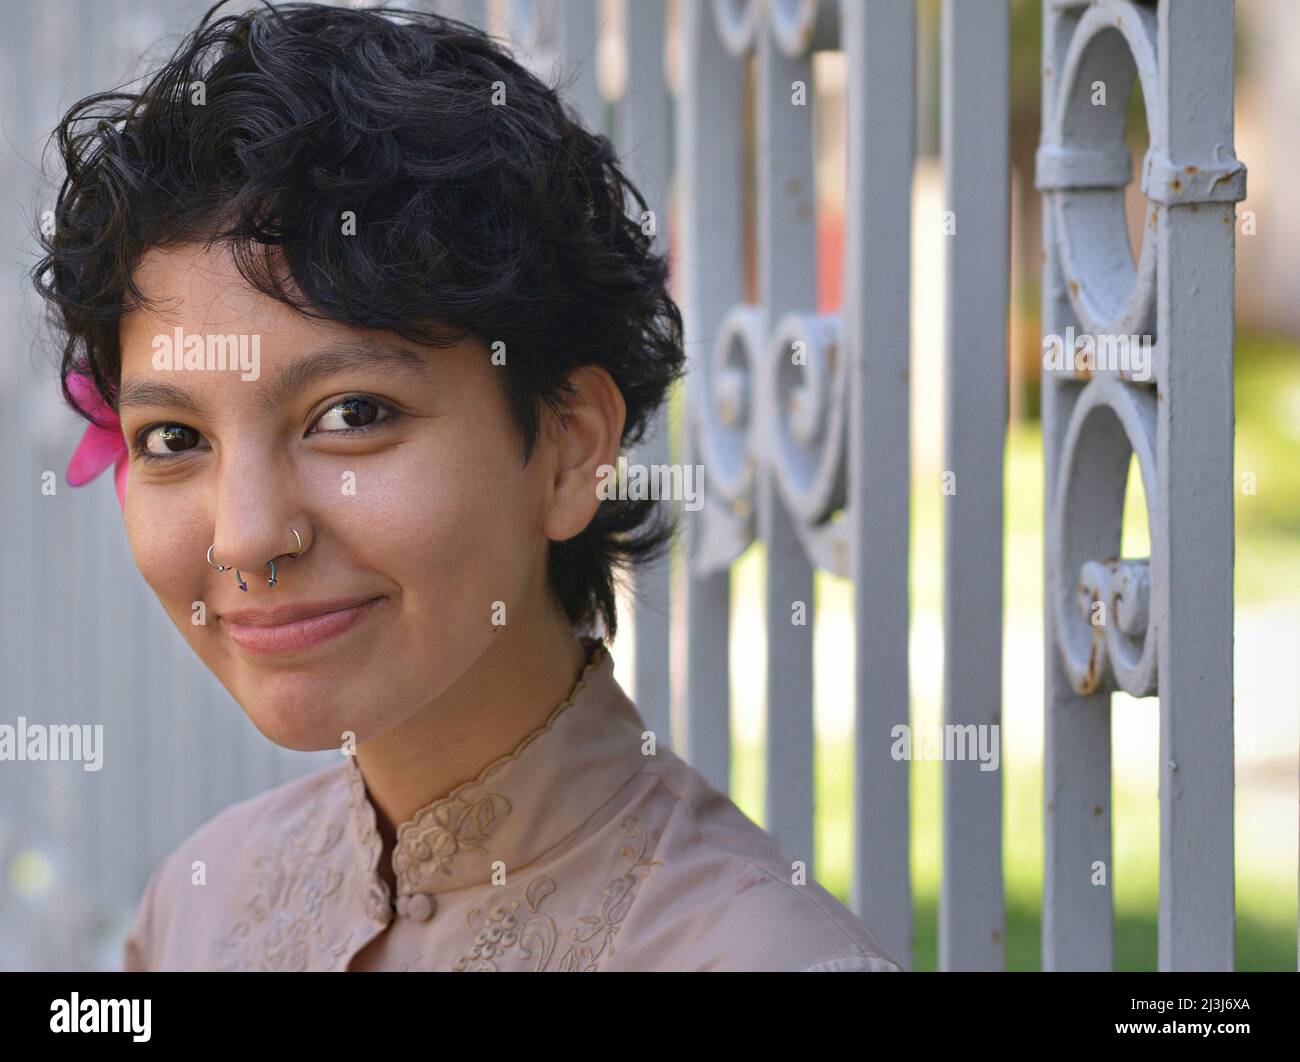 Young pretty sensual Latina woman with big brown eyes and a flower in her short curly black hair looks at the viewer in front of a wrought iron fence. Stock Photo